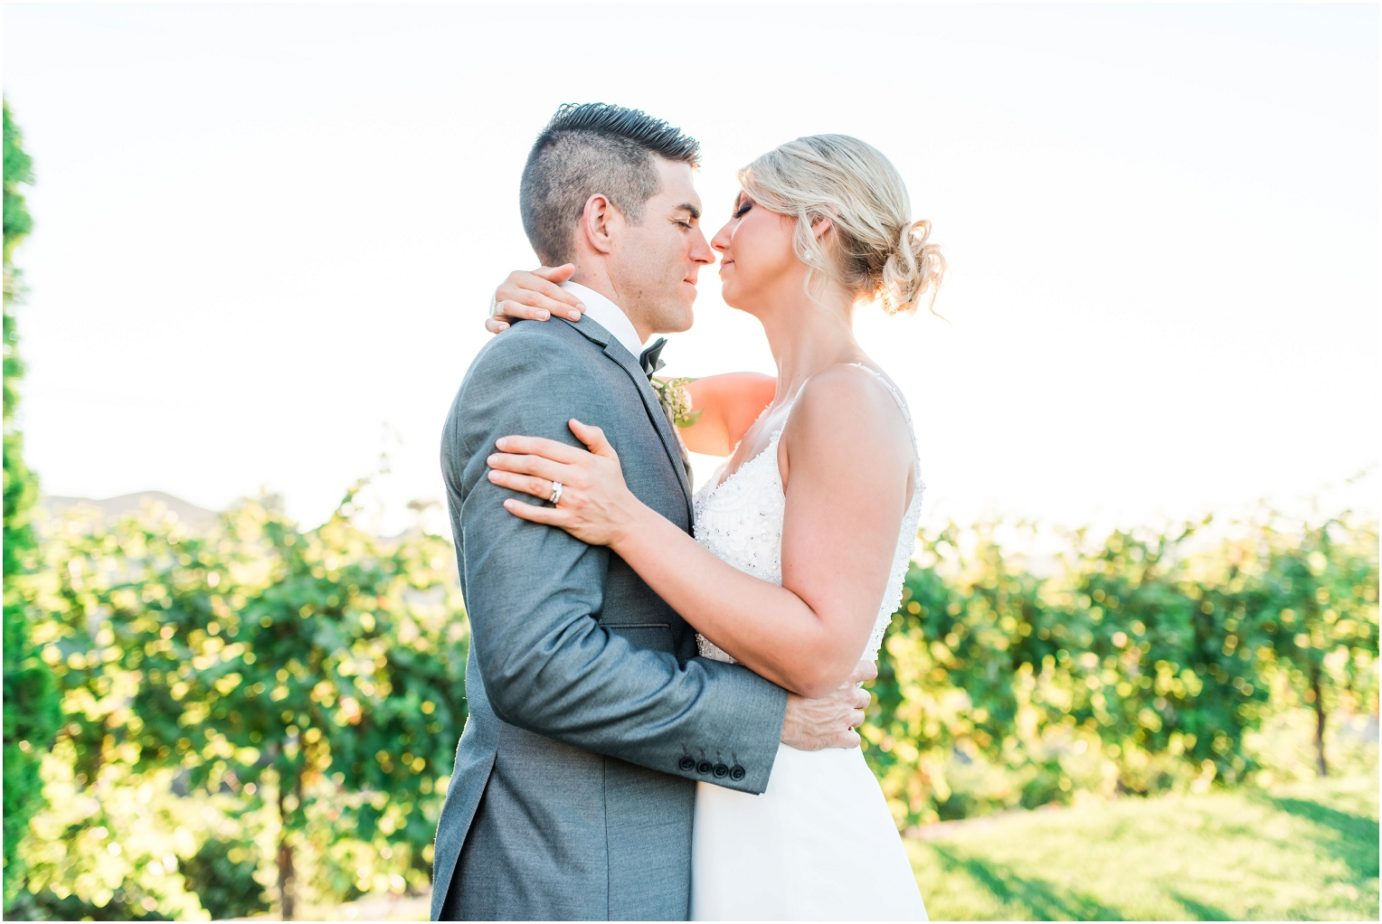 Chandler Reach Wedding Moscow Mule Inspiration Shoot Bride and groom in vineyard